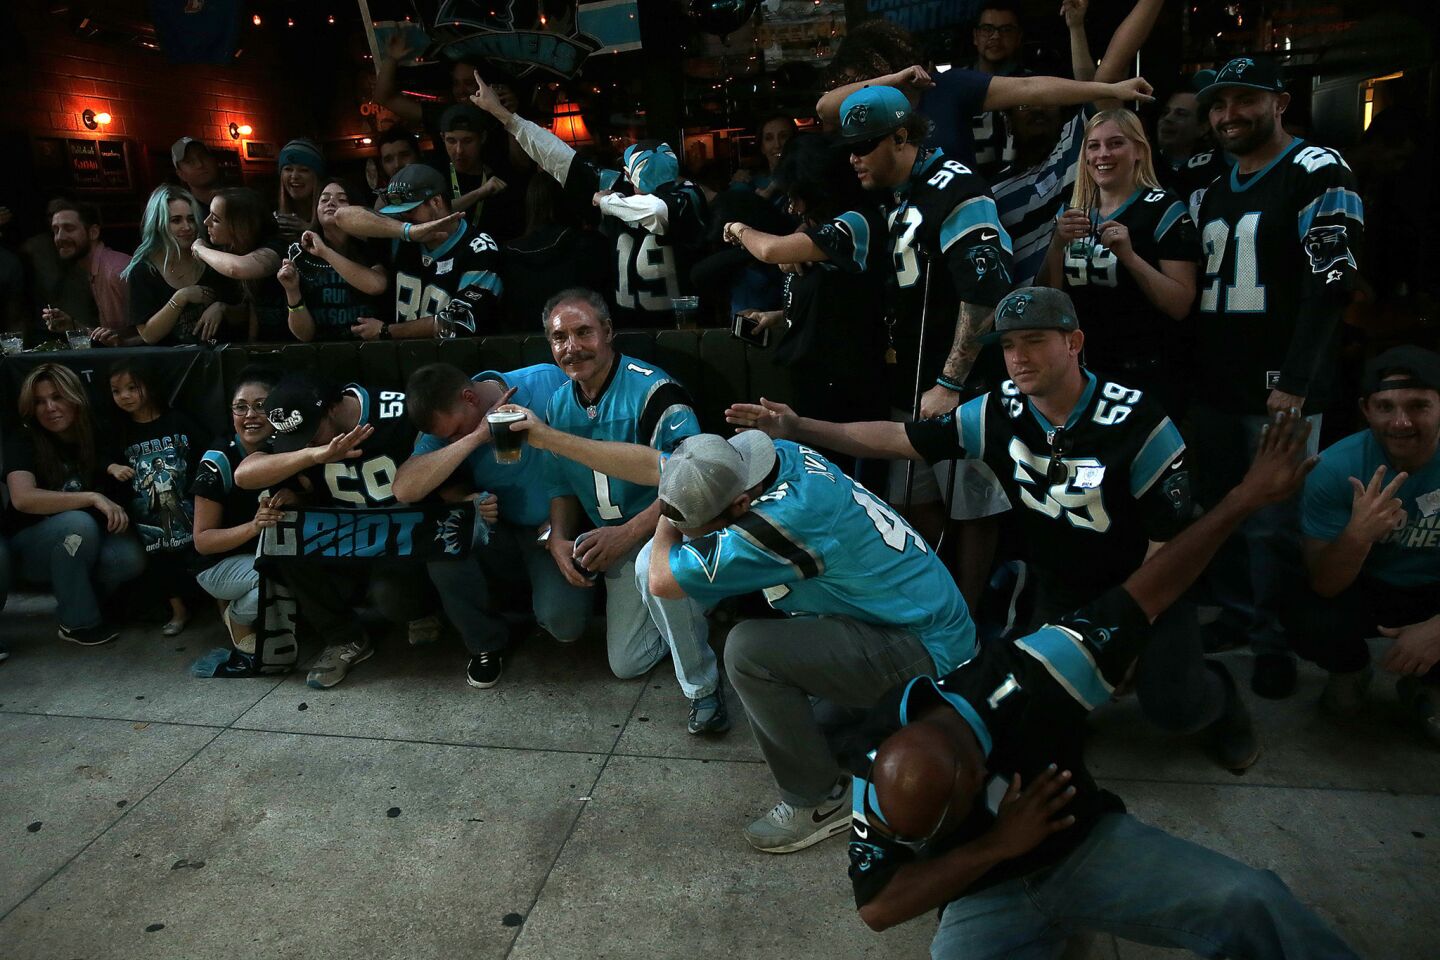 Panthers fans